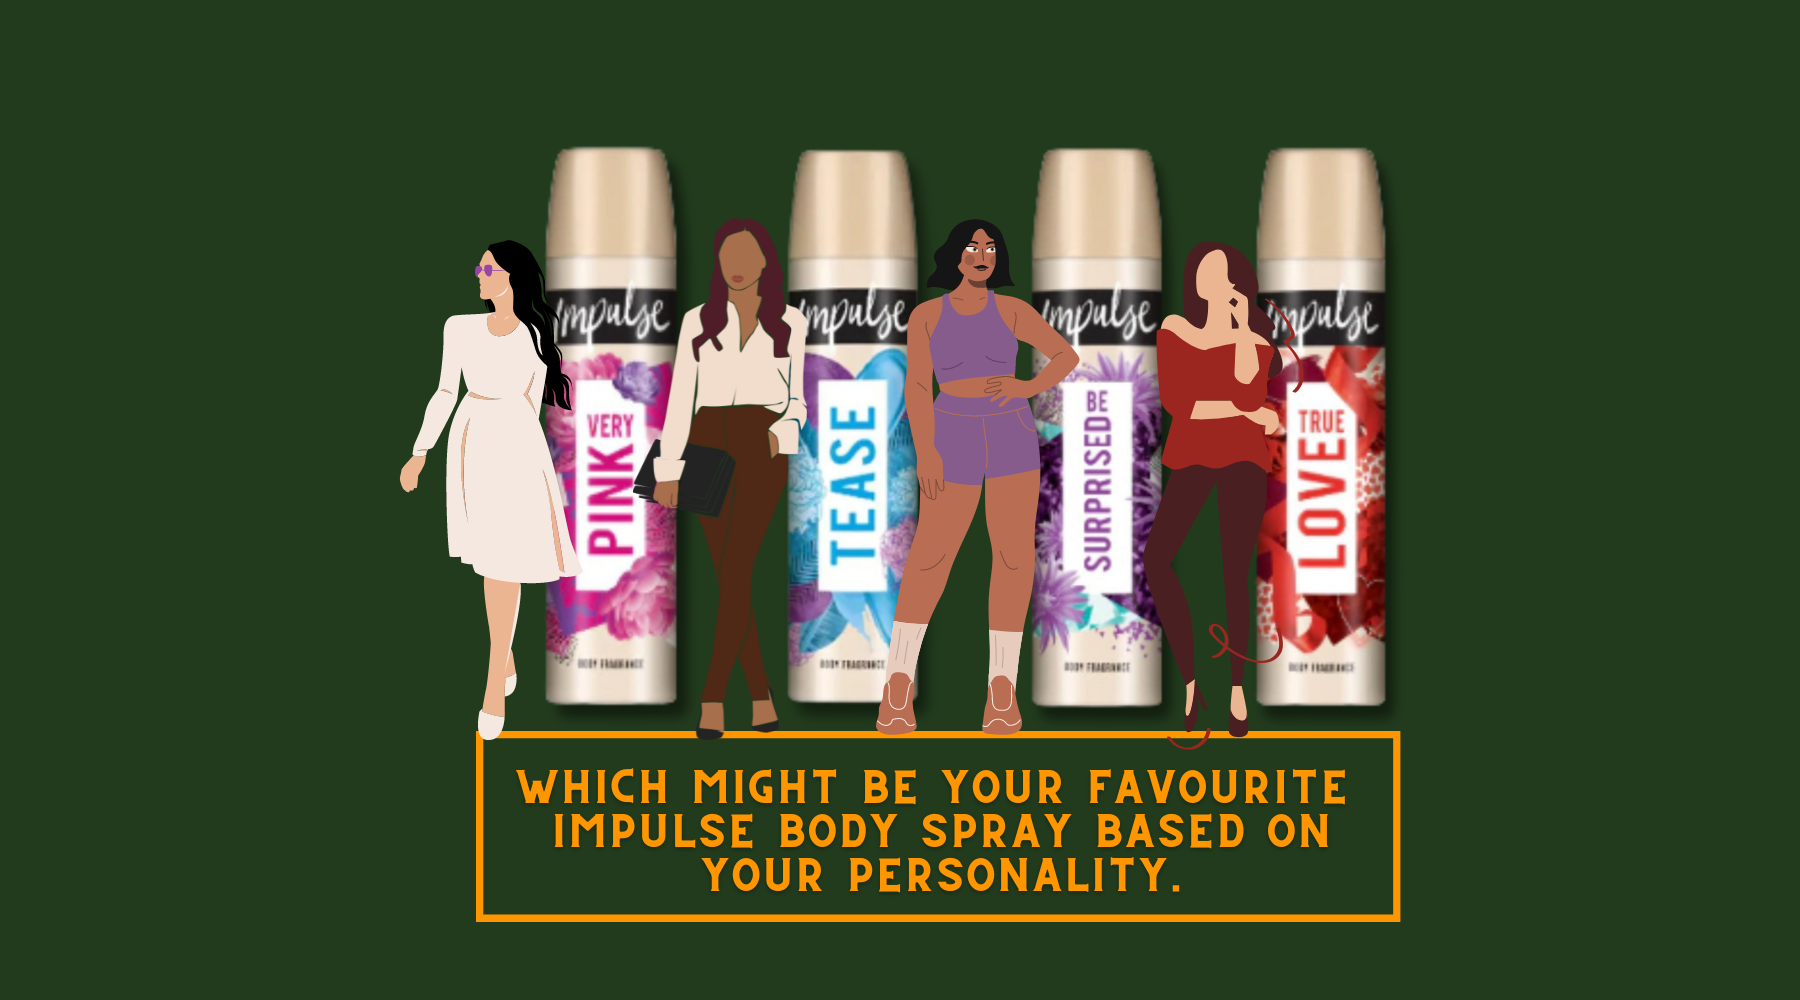 The Best Impulse Body Spray Fragrance For You Based On Your Personality